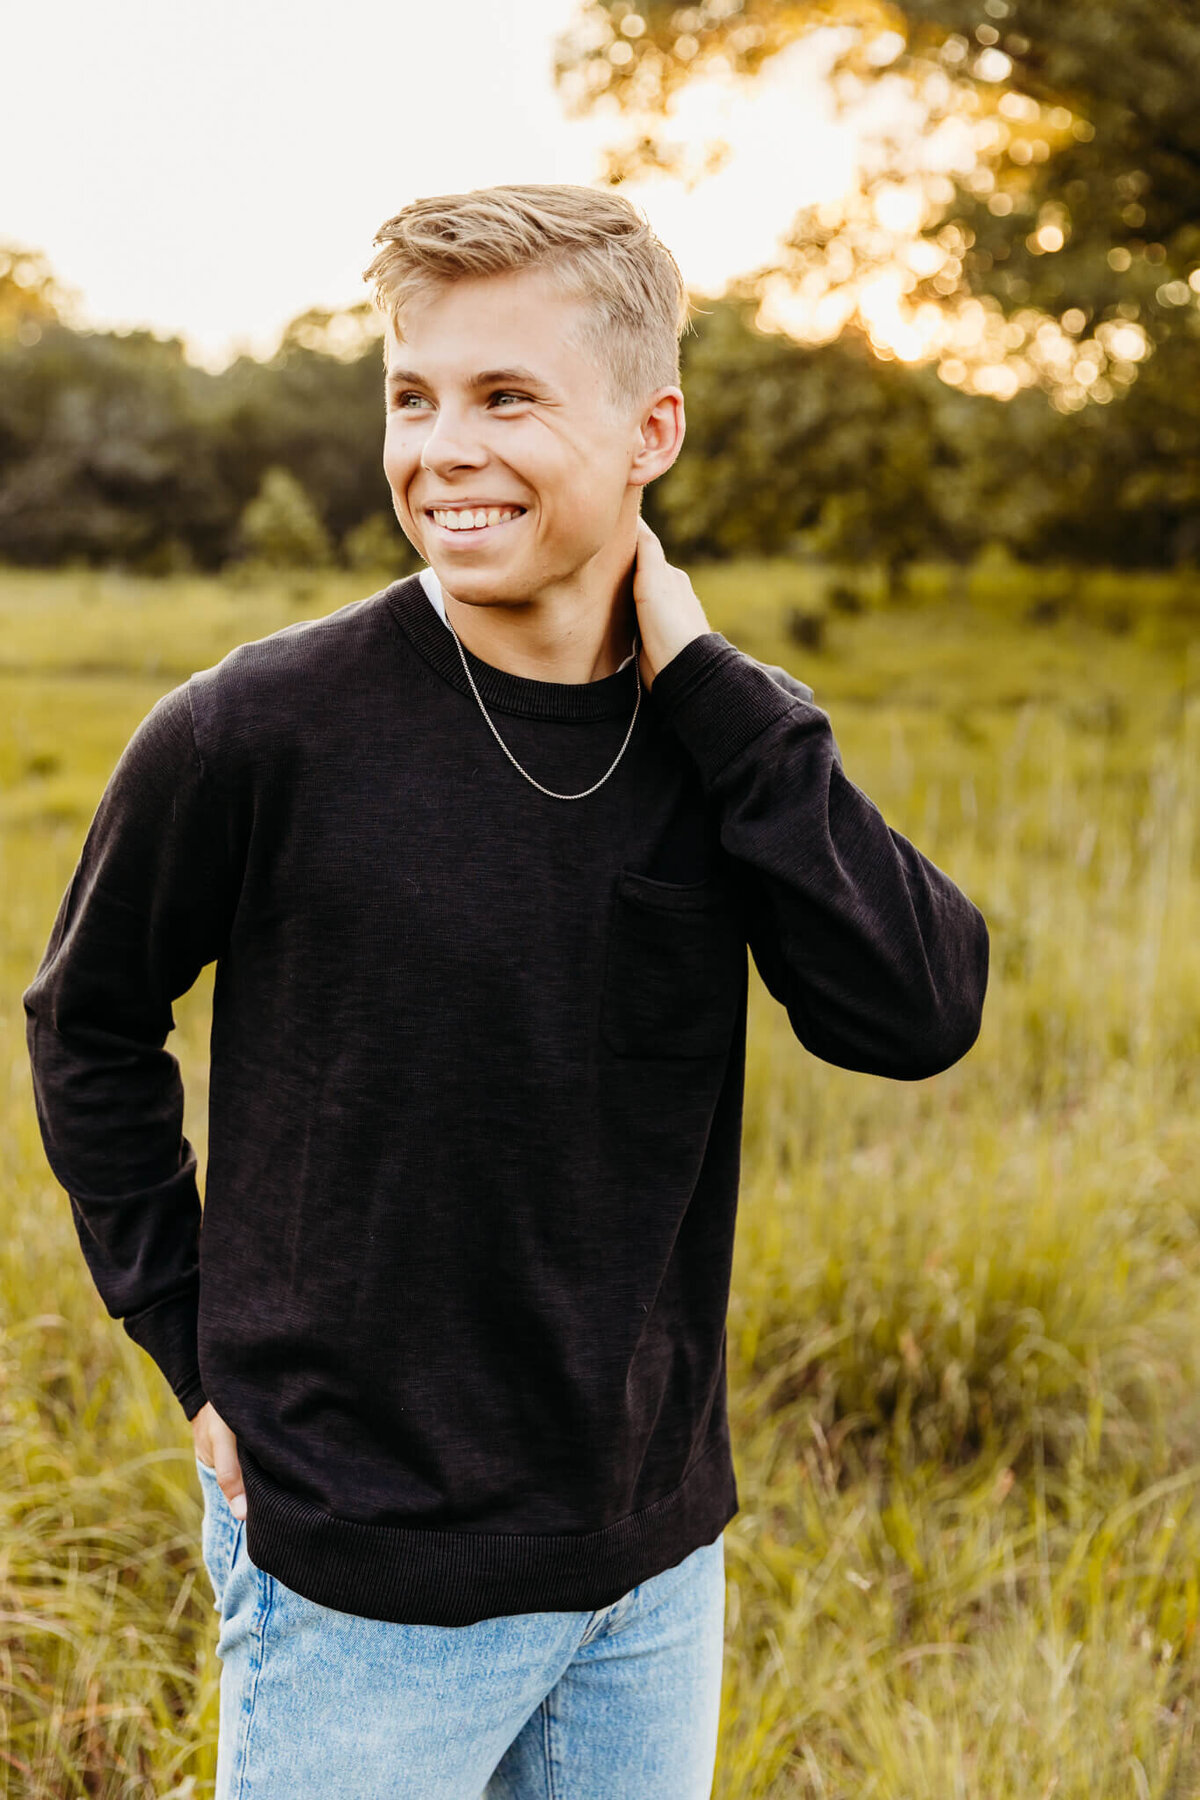 Teen boy rubbing neck with hand and laughing in a field